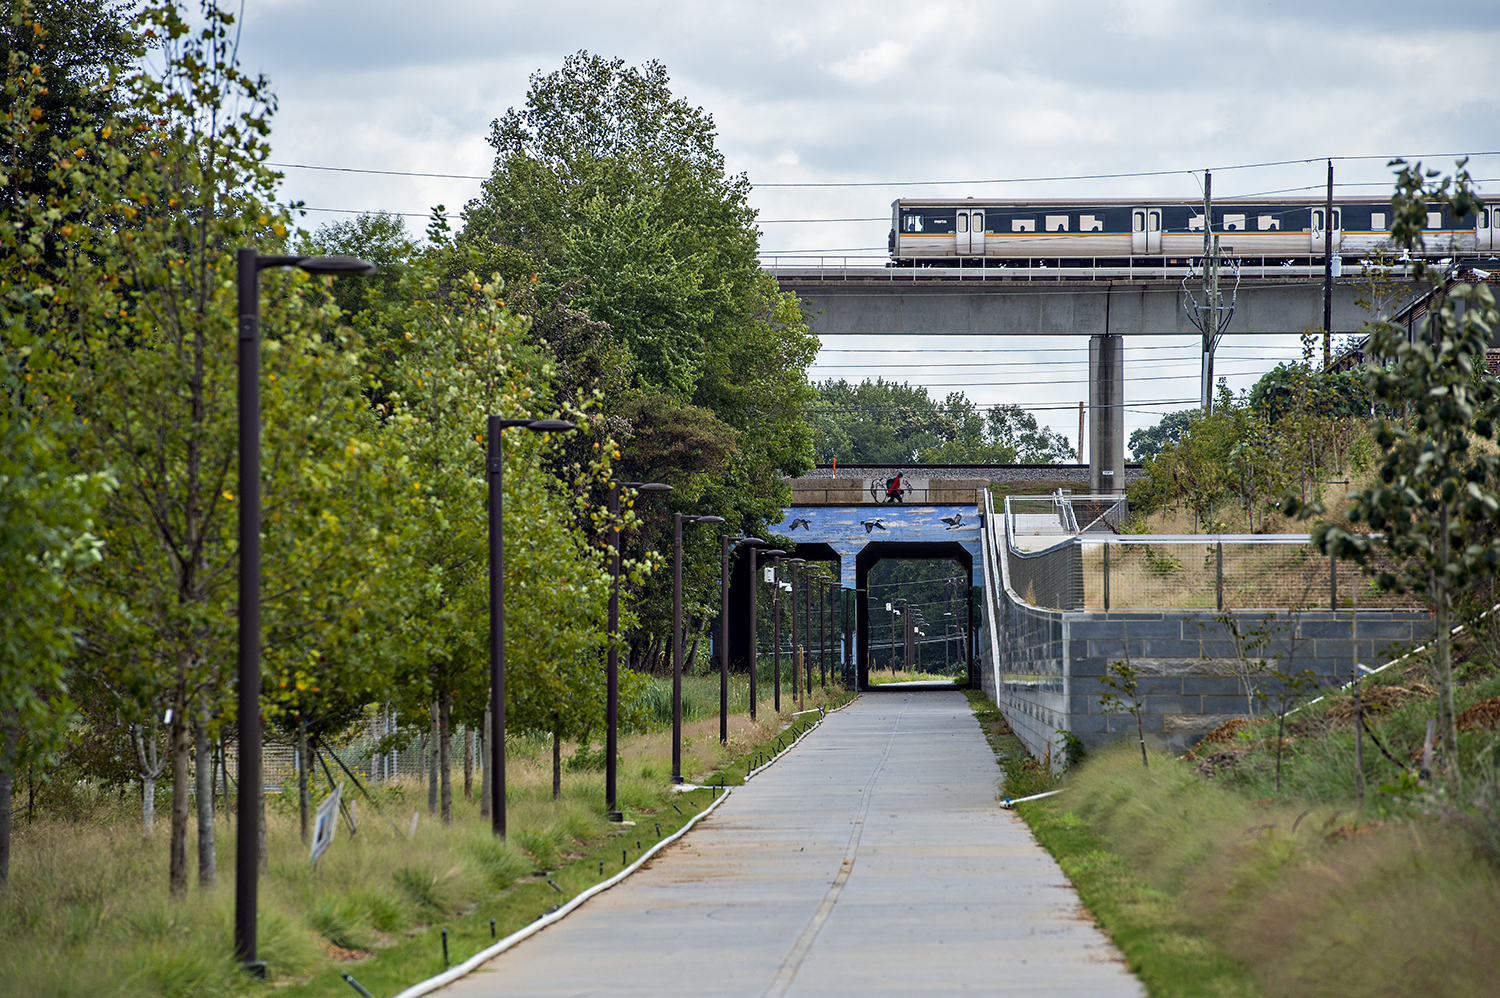 A concrete path with a MARTA train going over the top of it, with trees and light posts on either side.